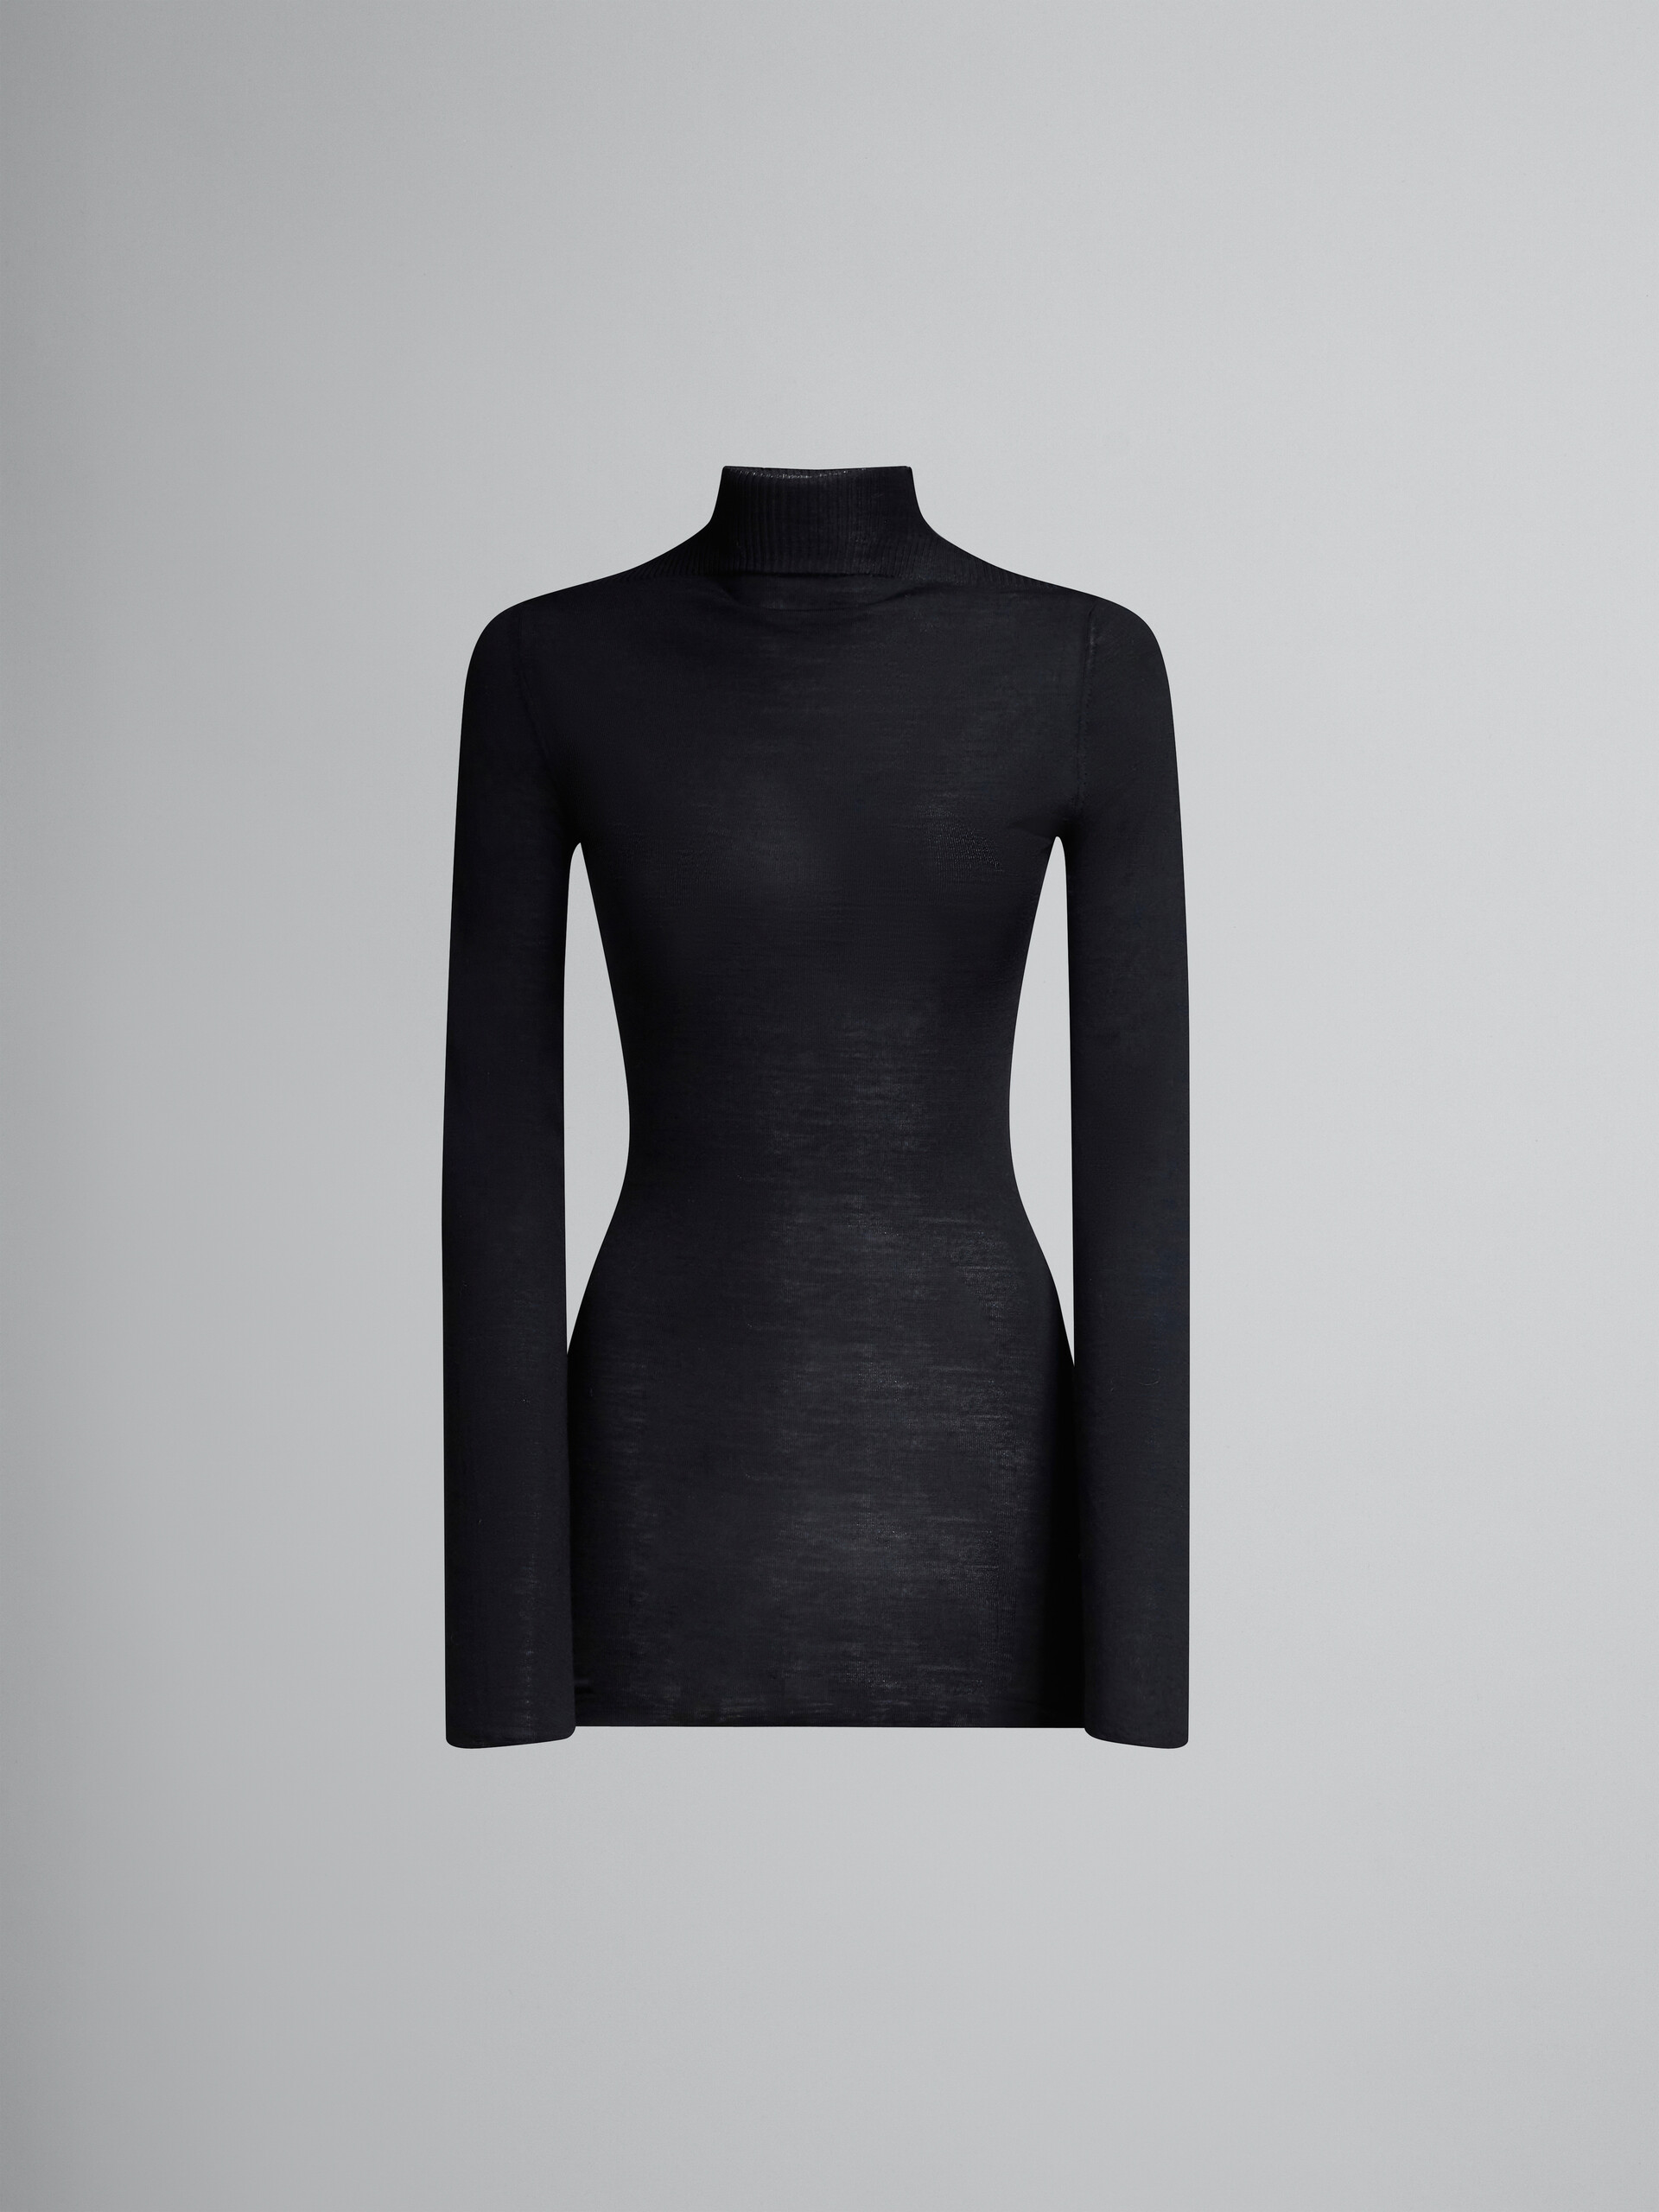 Black fitted jumper with ribbed turtle neck - Pullovers - Image 1